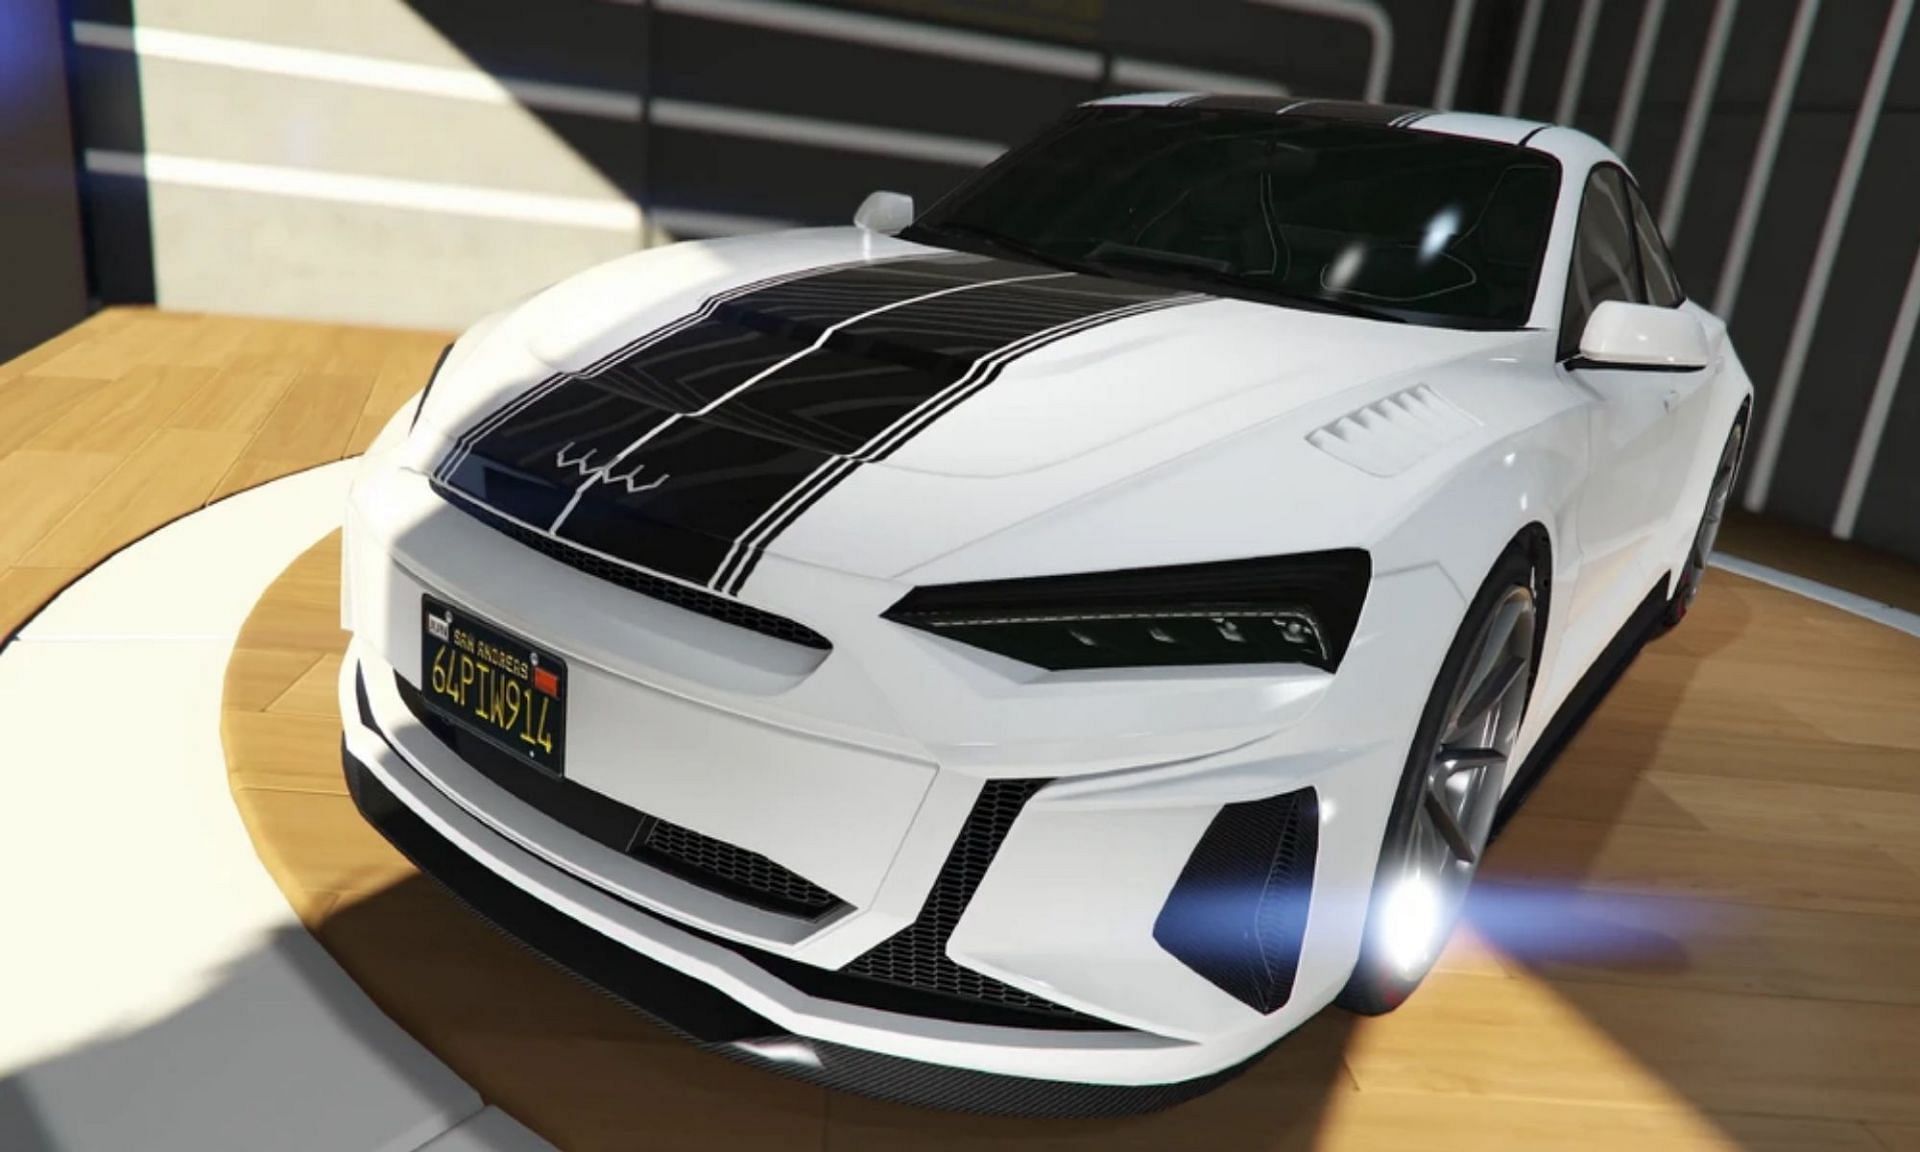 This electric car is a real head turner (Image via Rockstar Games)